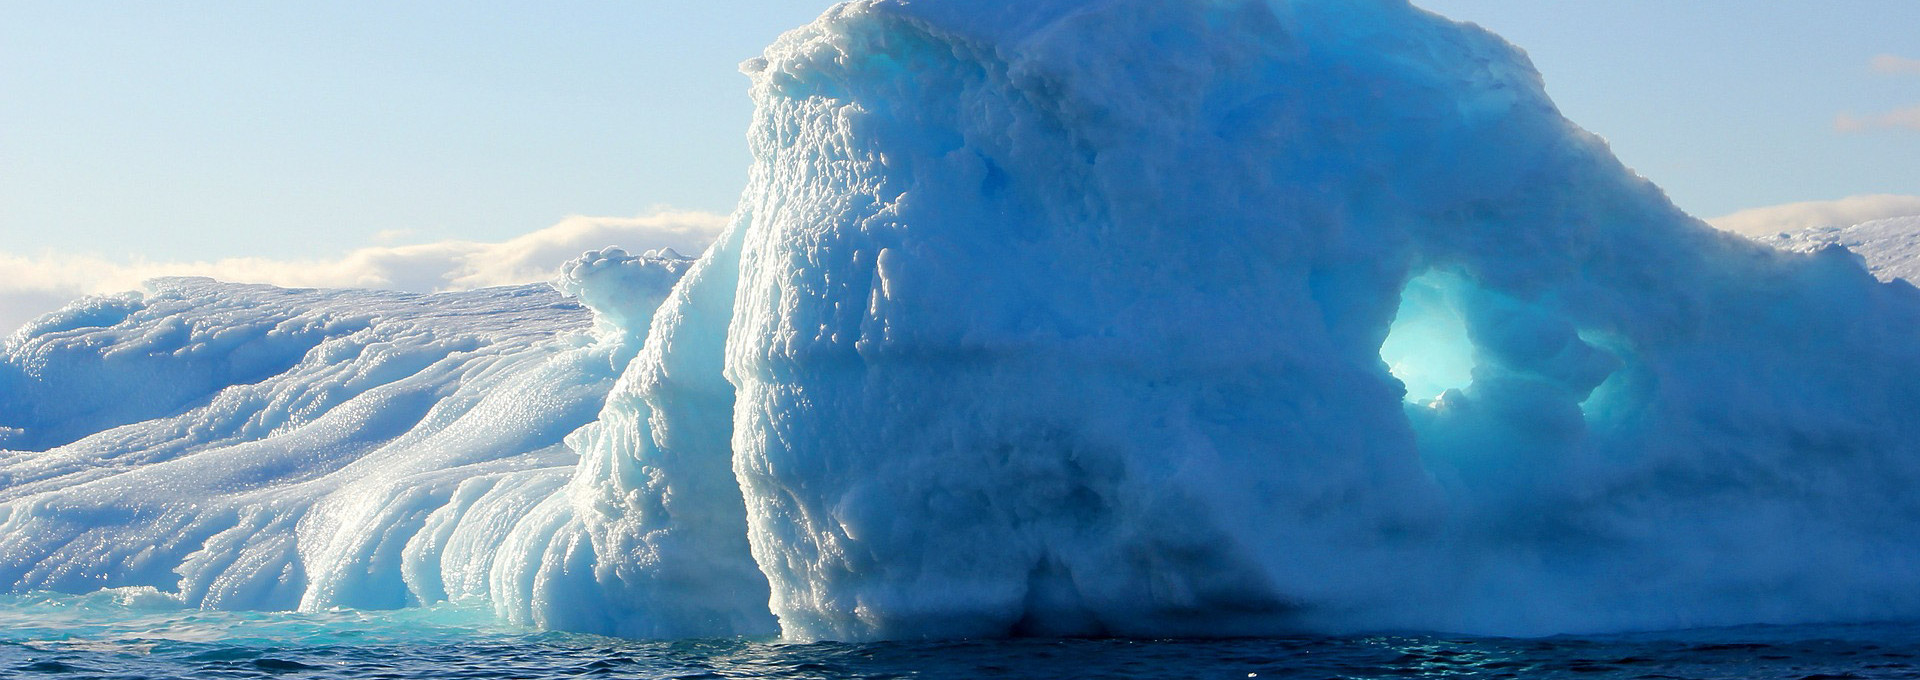 A blue and white iceberg rises out of the water at an icy landscape